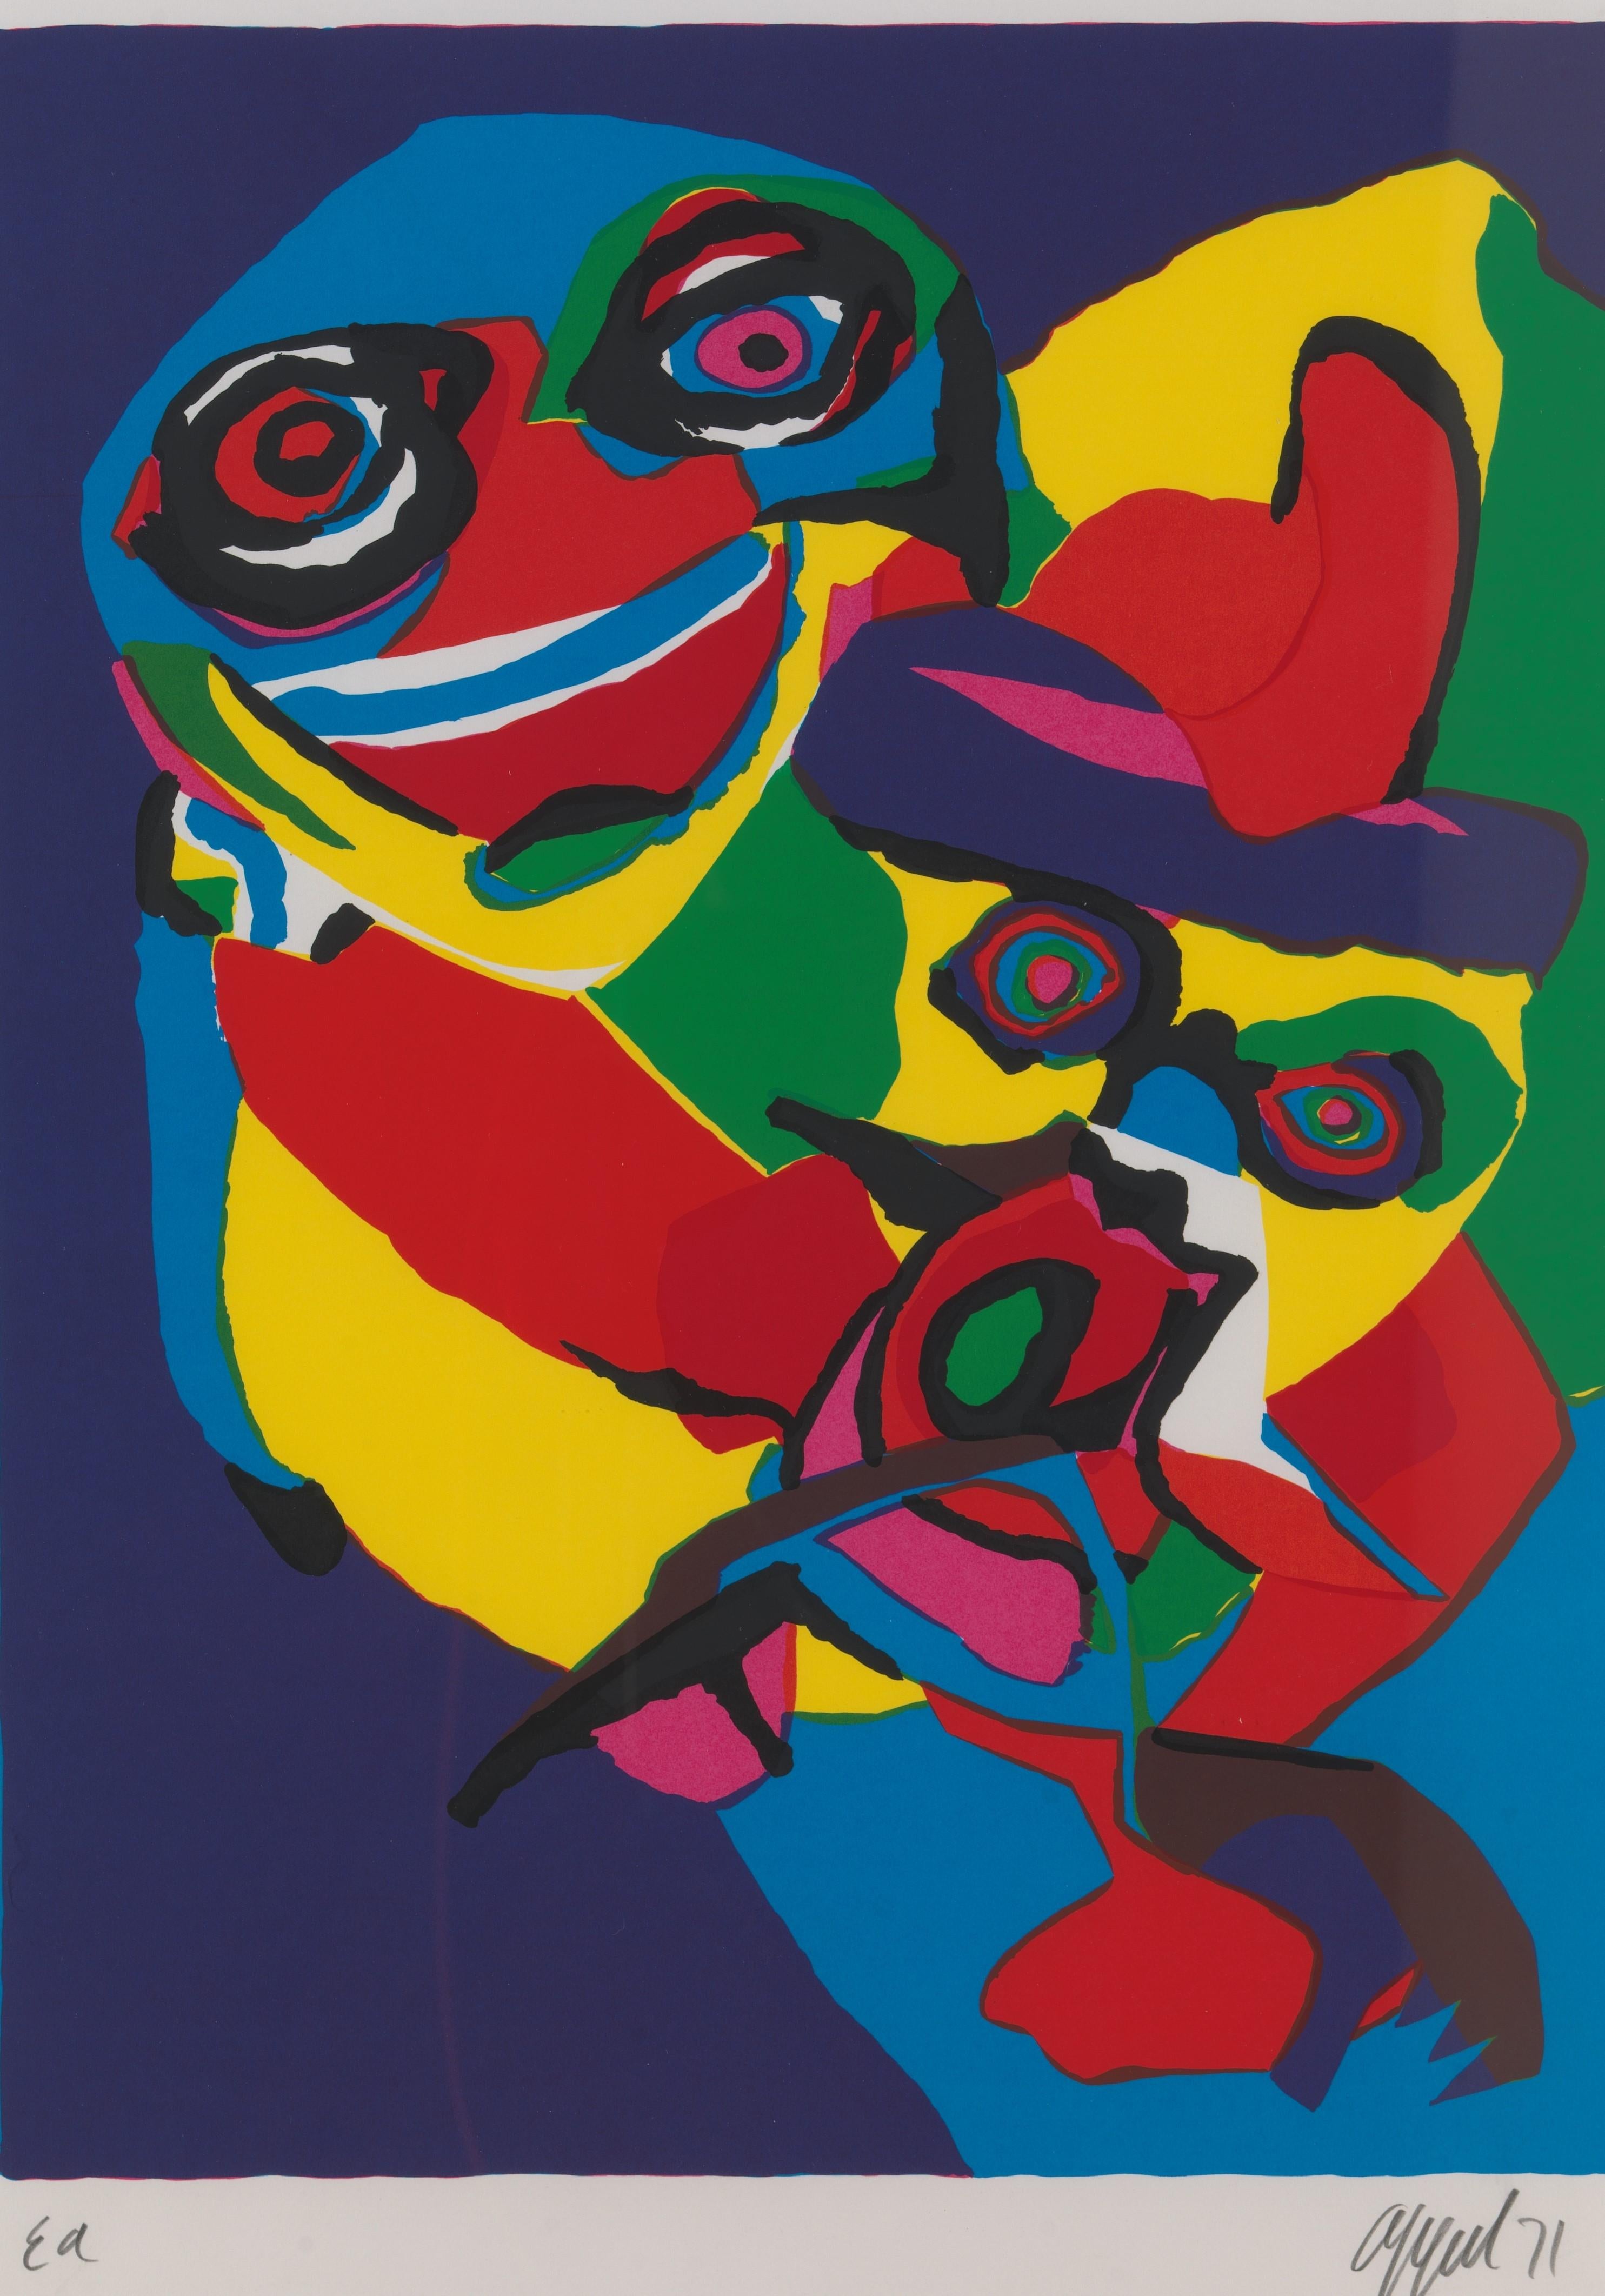 Extraordinary screen print from 1971 by Artist Karel Appel (1921-2006): expressive and bold composition and colors. Pencil signed 'EA' and dated 'Appel 71’. An artist’s proof, aside from the edition of 100. Dimensions are 73 cm x 103 cm with frame